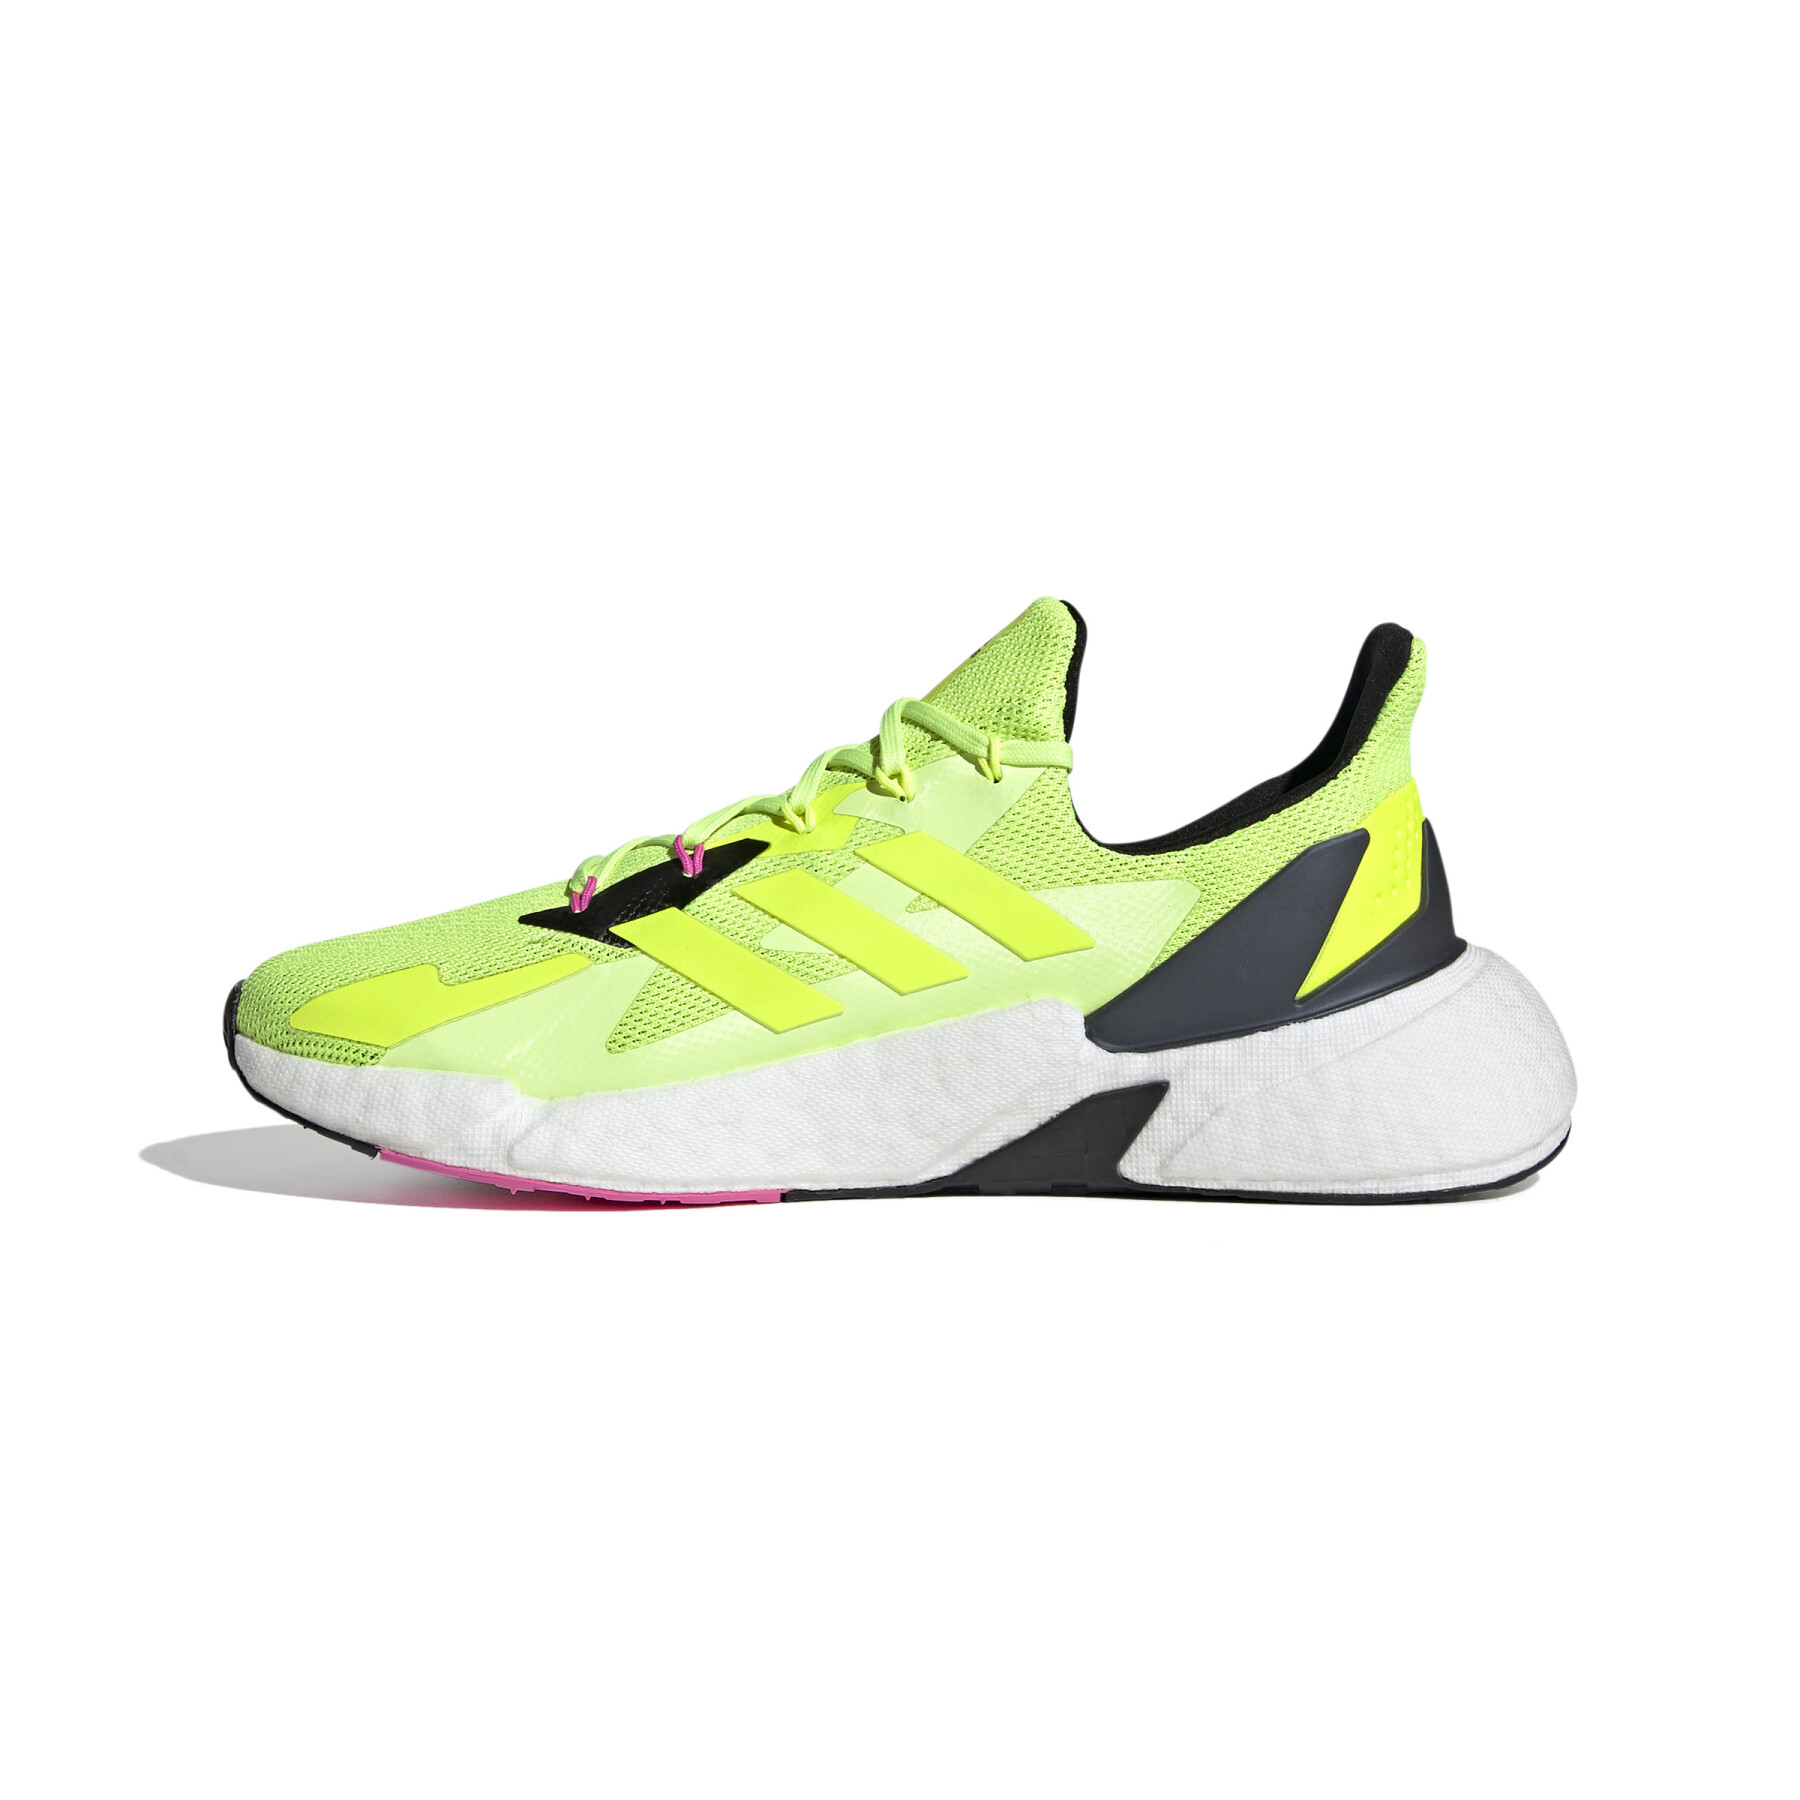 Sneakers adidas X9000L4